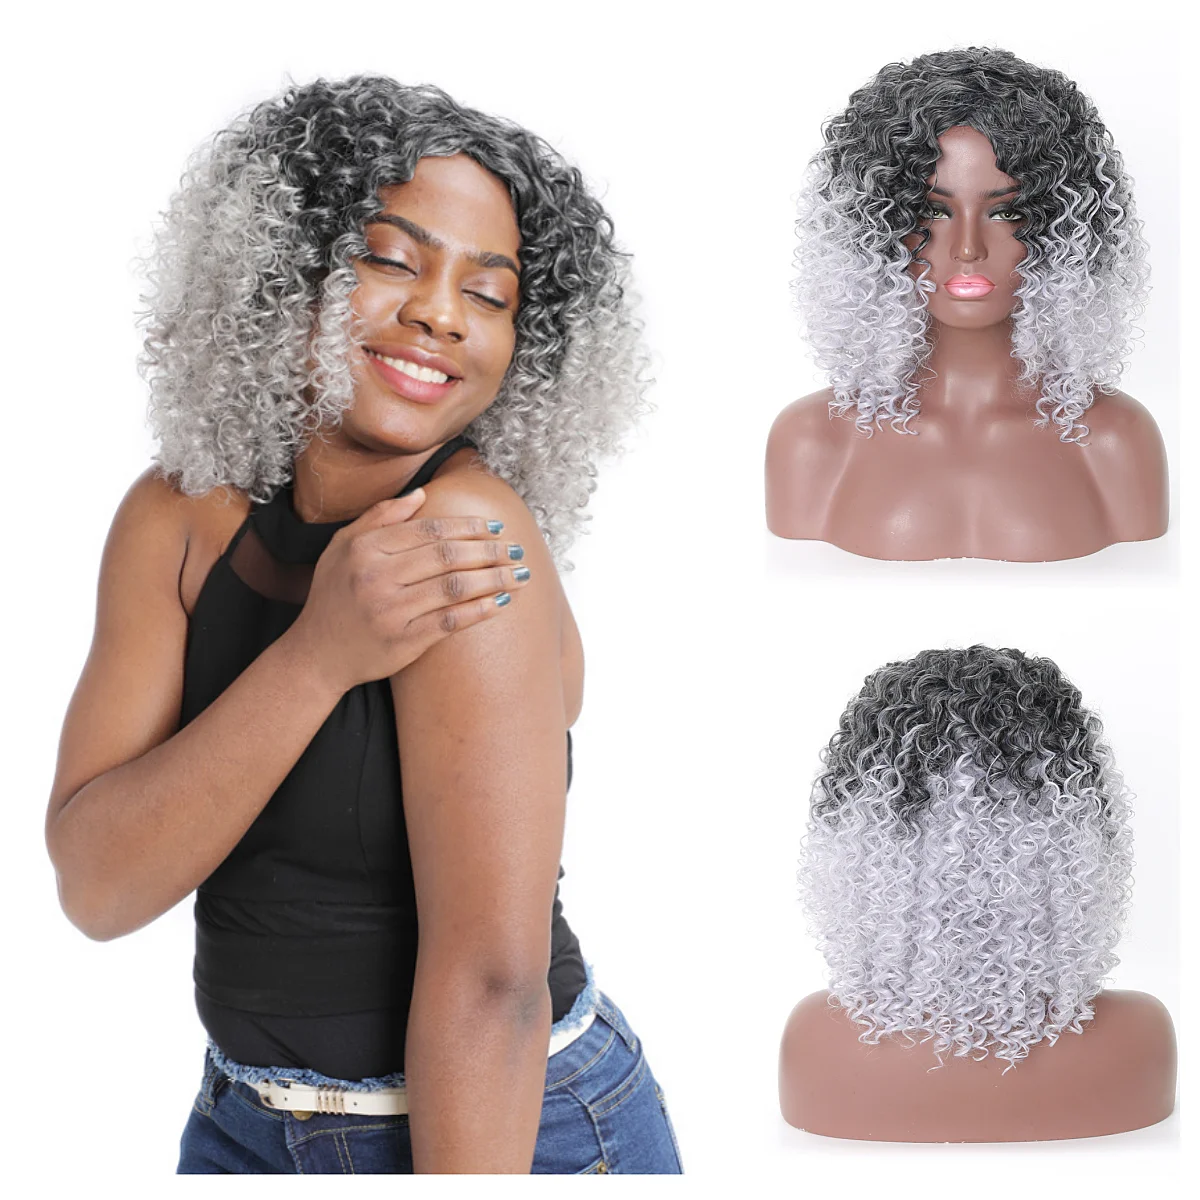 

Short Afro Curly Synthetic Wigs with Bangs Black and White Ombre Bomb Fiber Wig for Black Women Cosplay Daily Heat Resistant